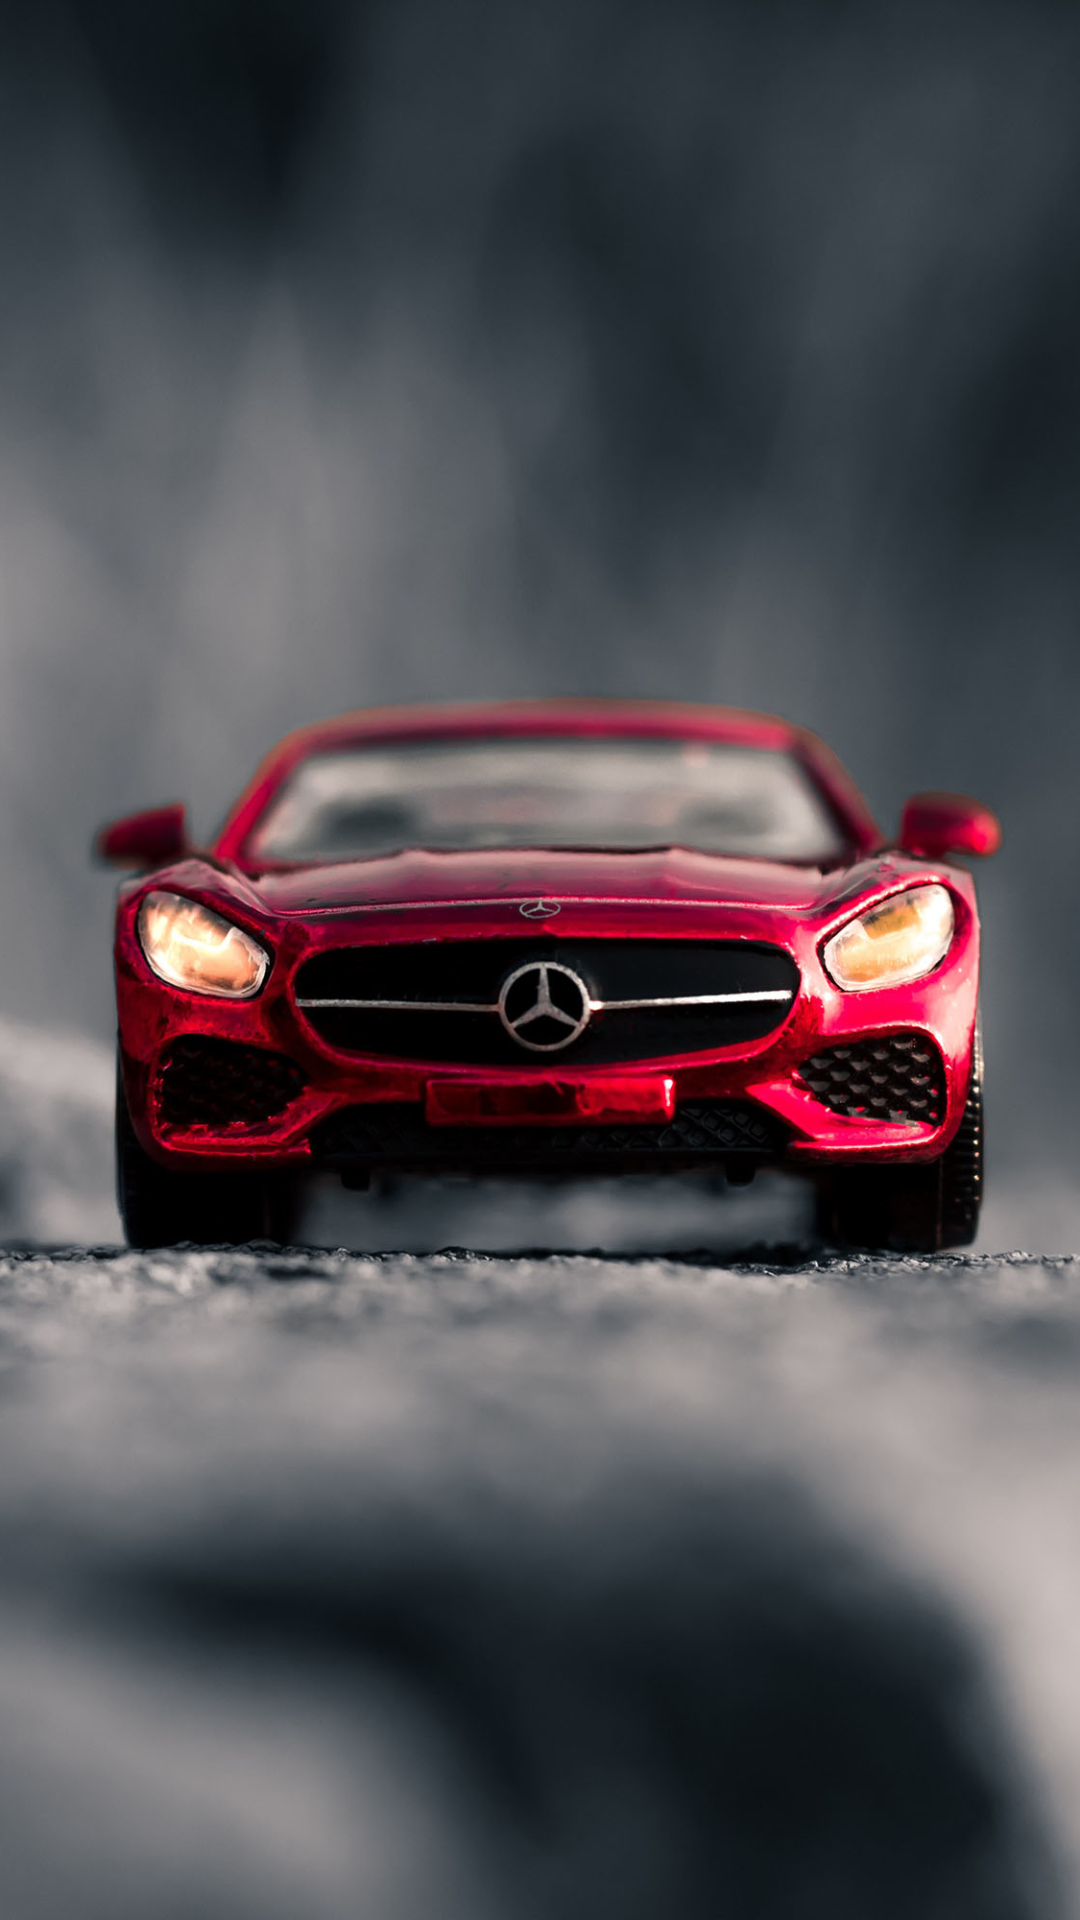 Toy Car Wallpaper For Mobile